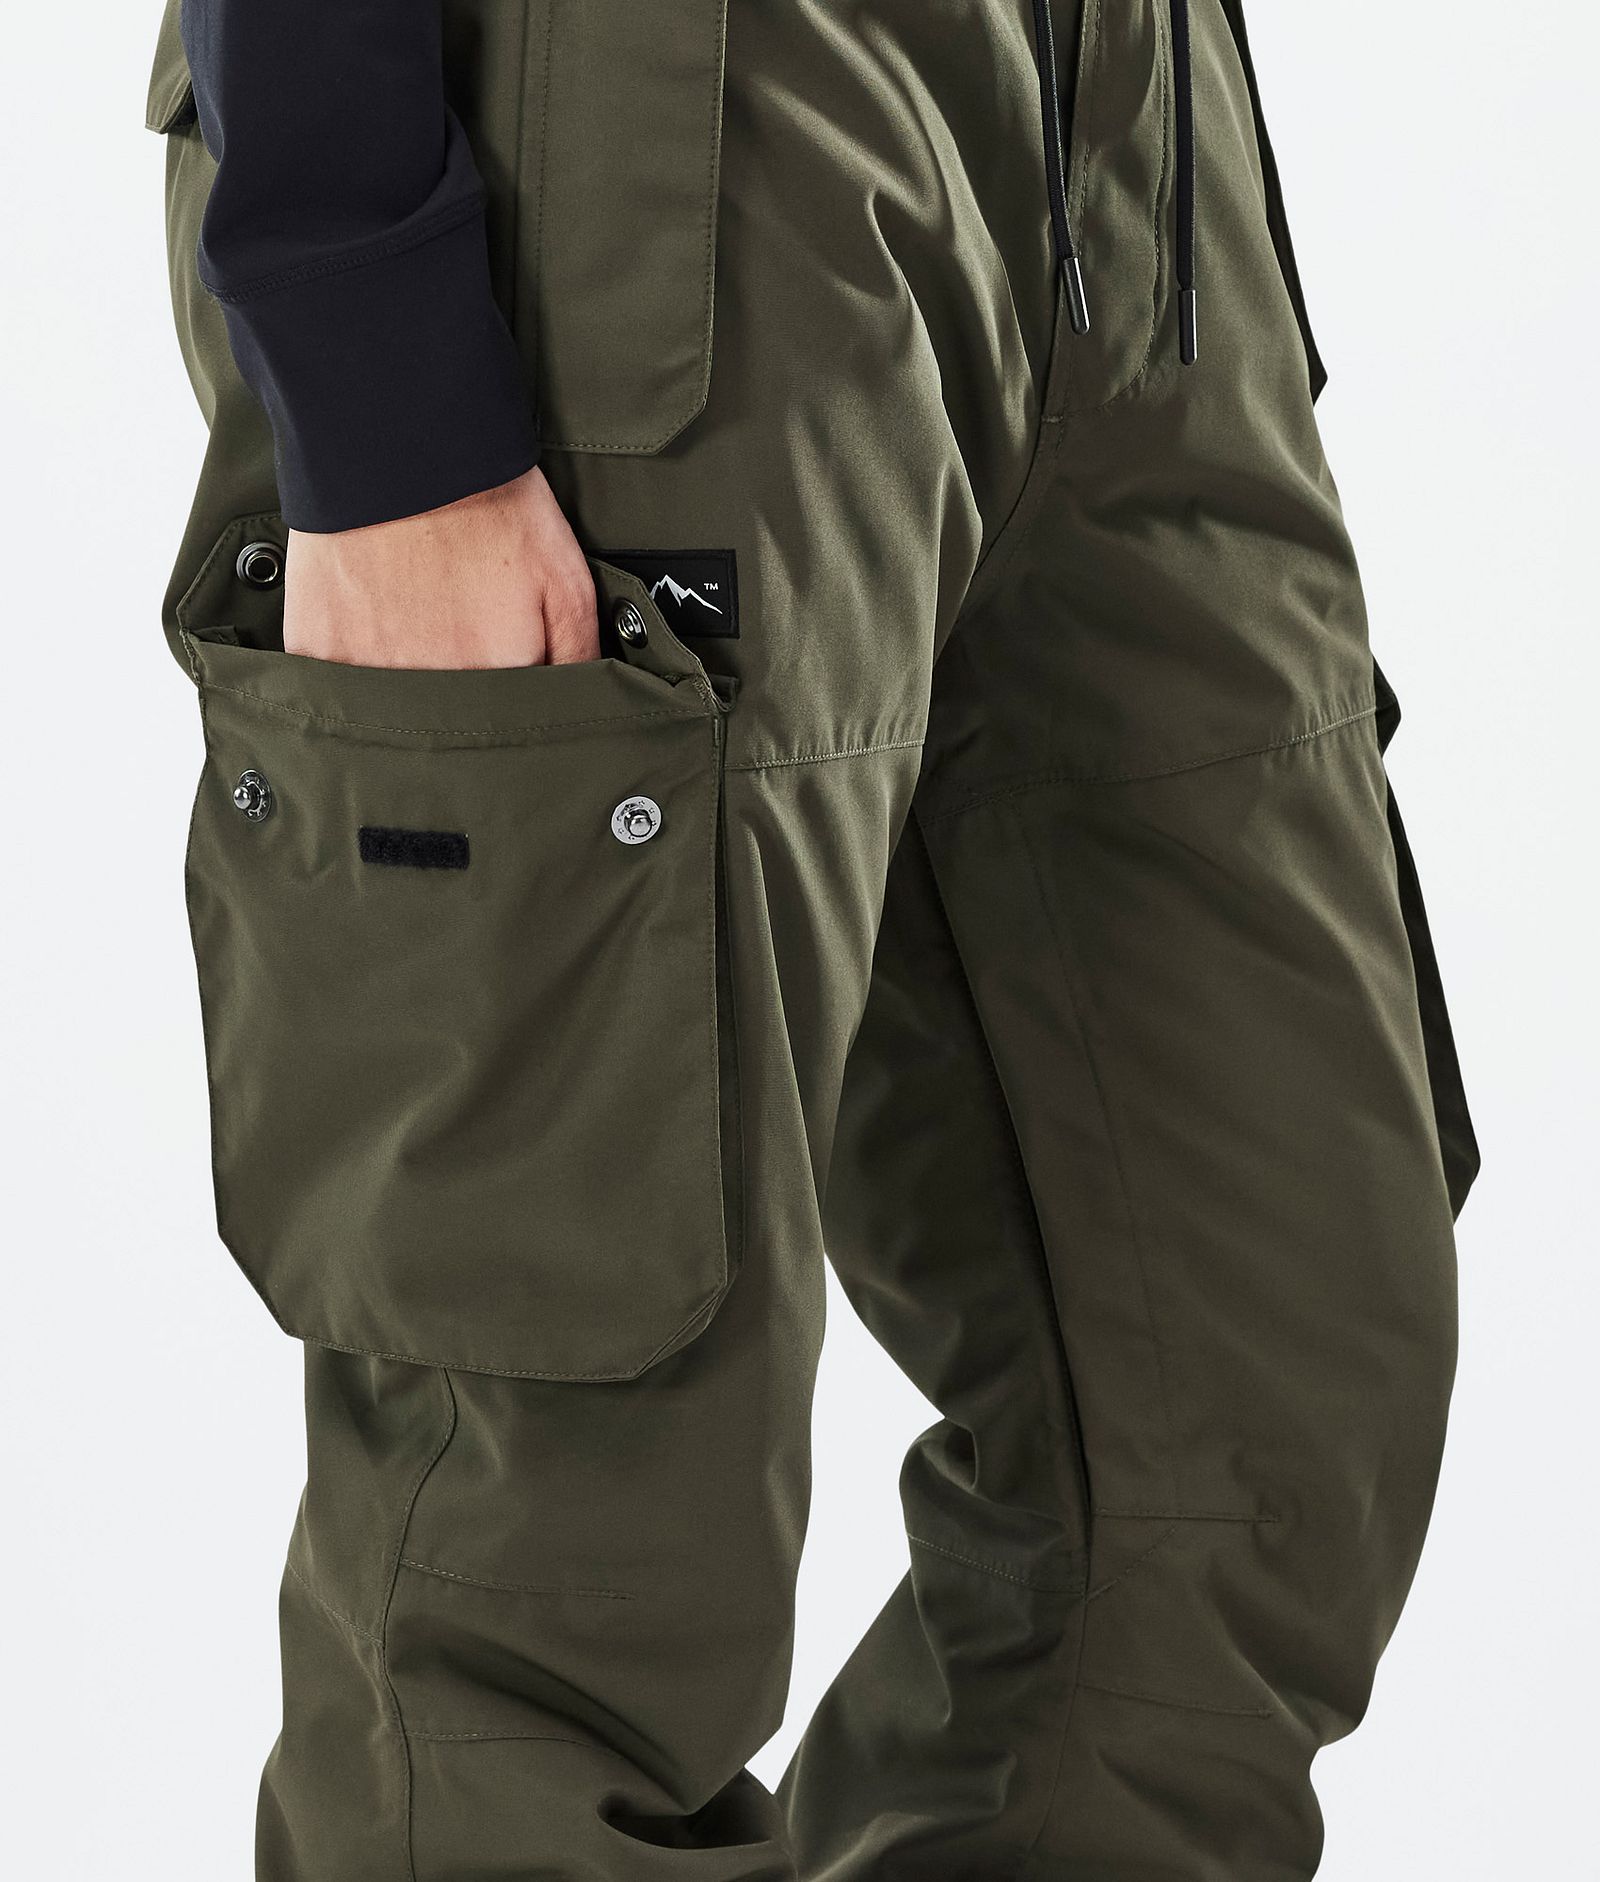 Dope Iconic W Pantalones Snowboard Mujer Olive Green